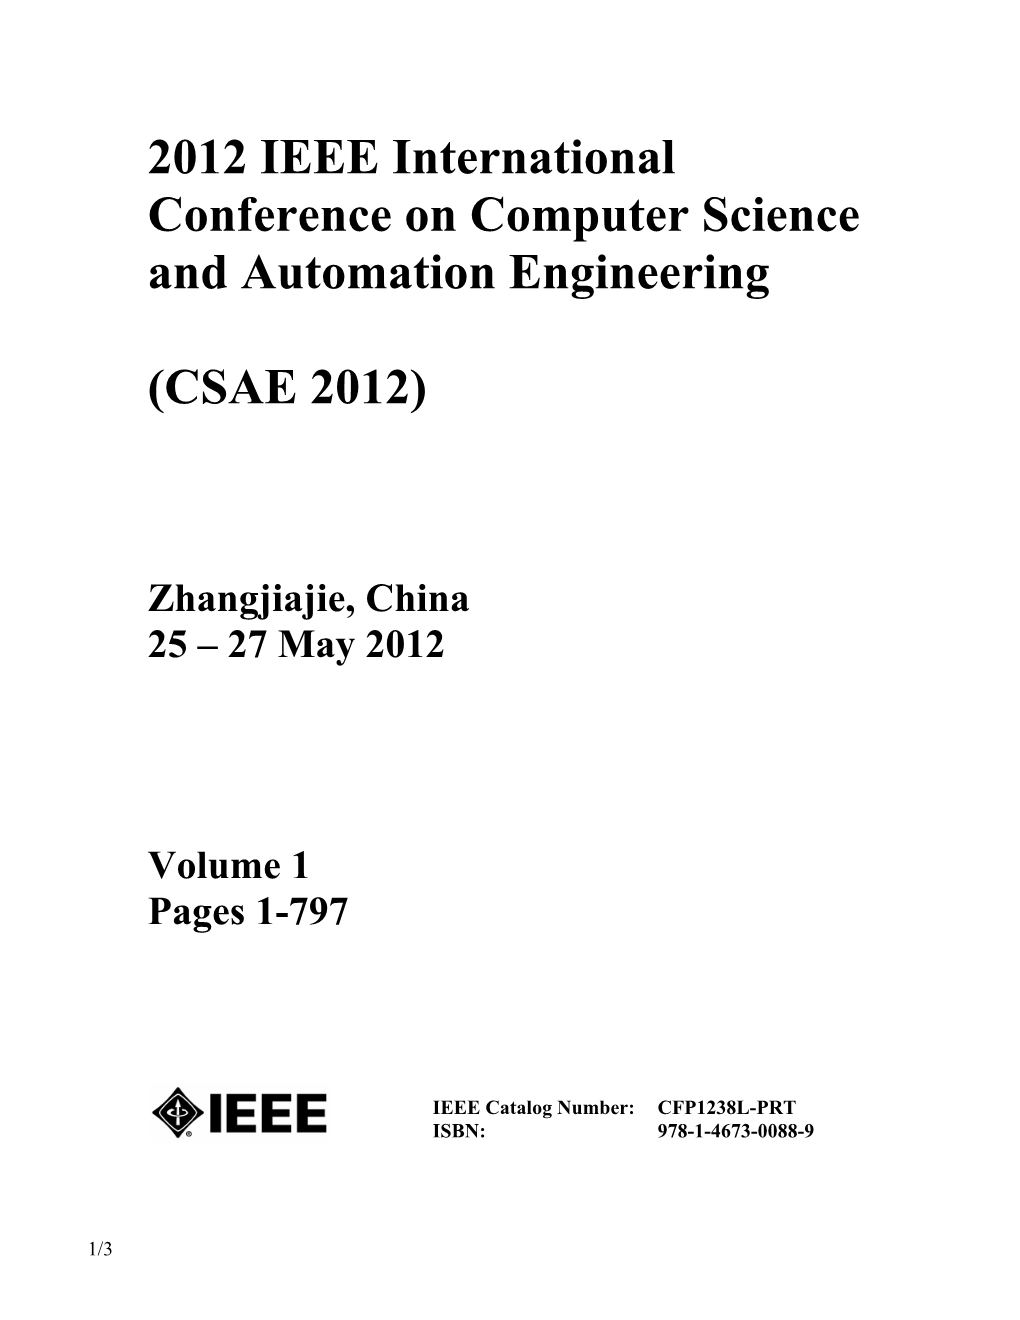 2012 IEEE International Conference on Computer Science and Automation Engineering